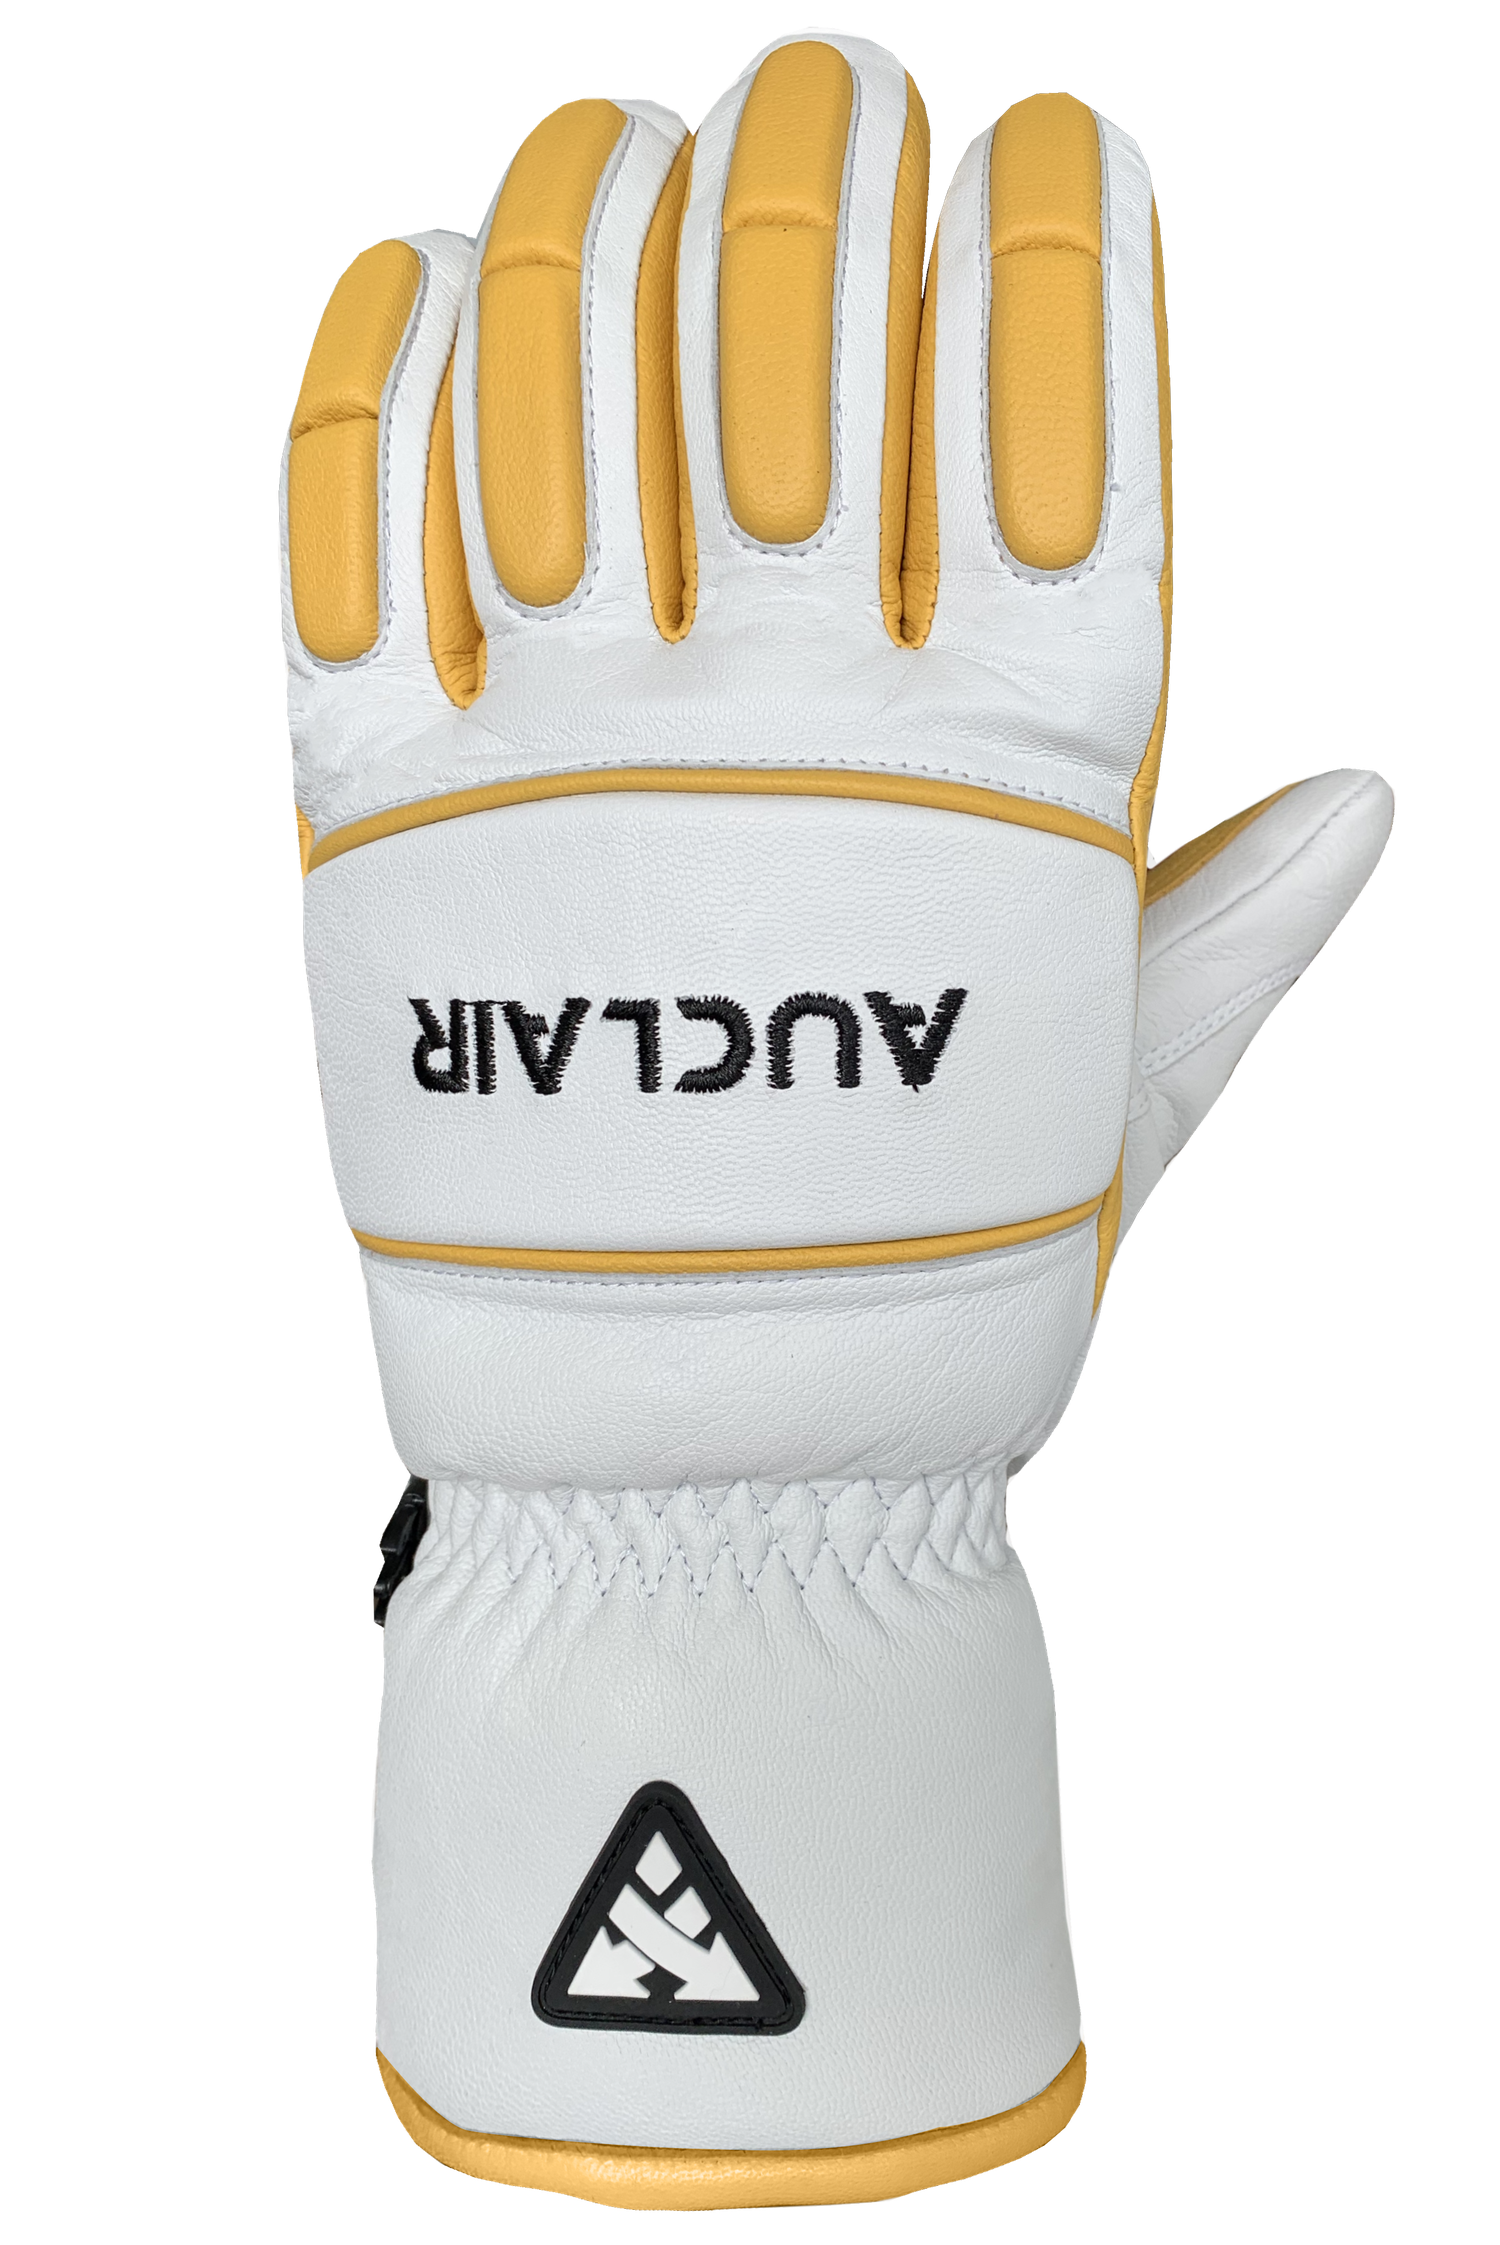 Son of T 4 Gloves - Adult, White/Gold